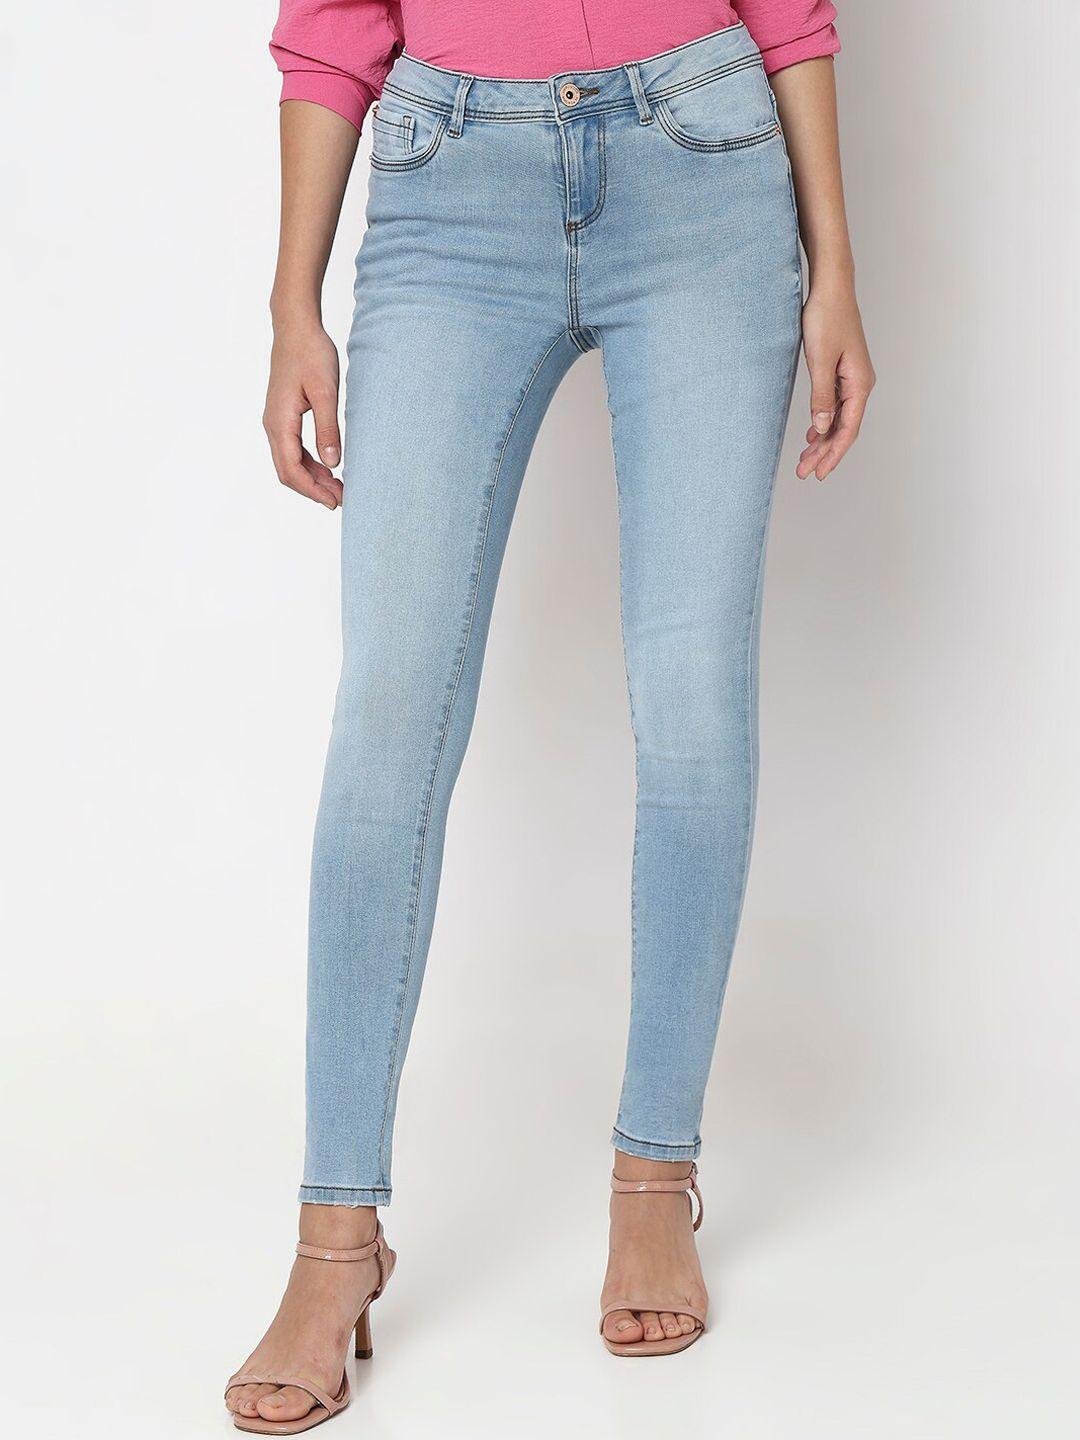 Vero Moda Women Skinny Fit High-Rise Light Fade Stretchable Jeans